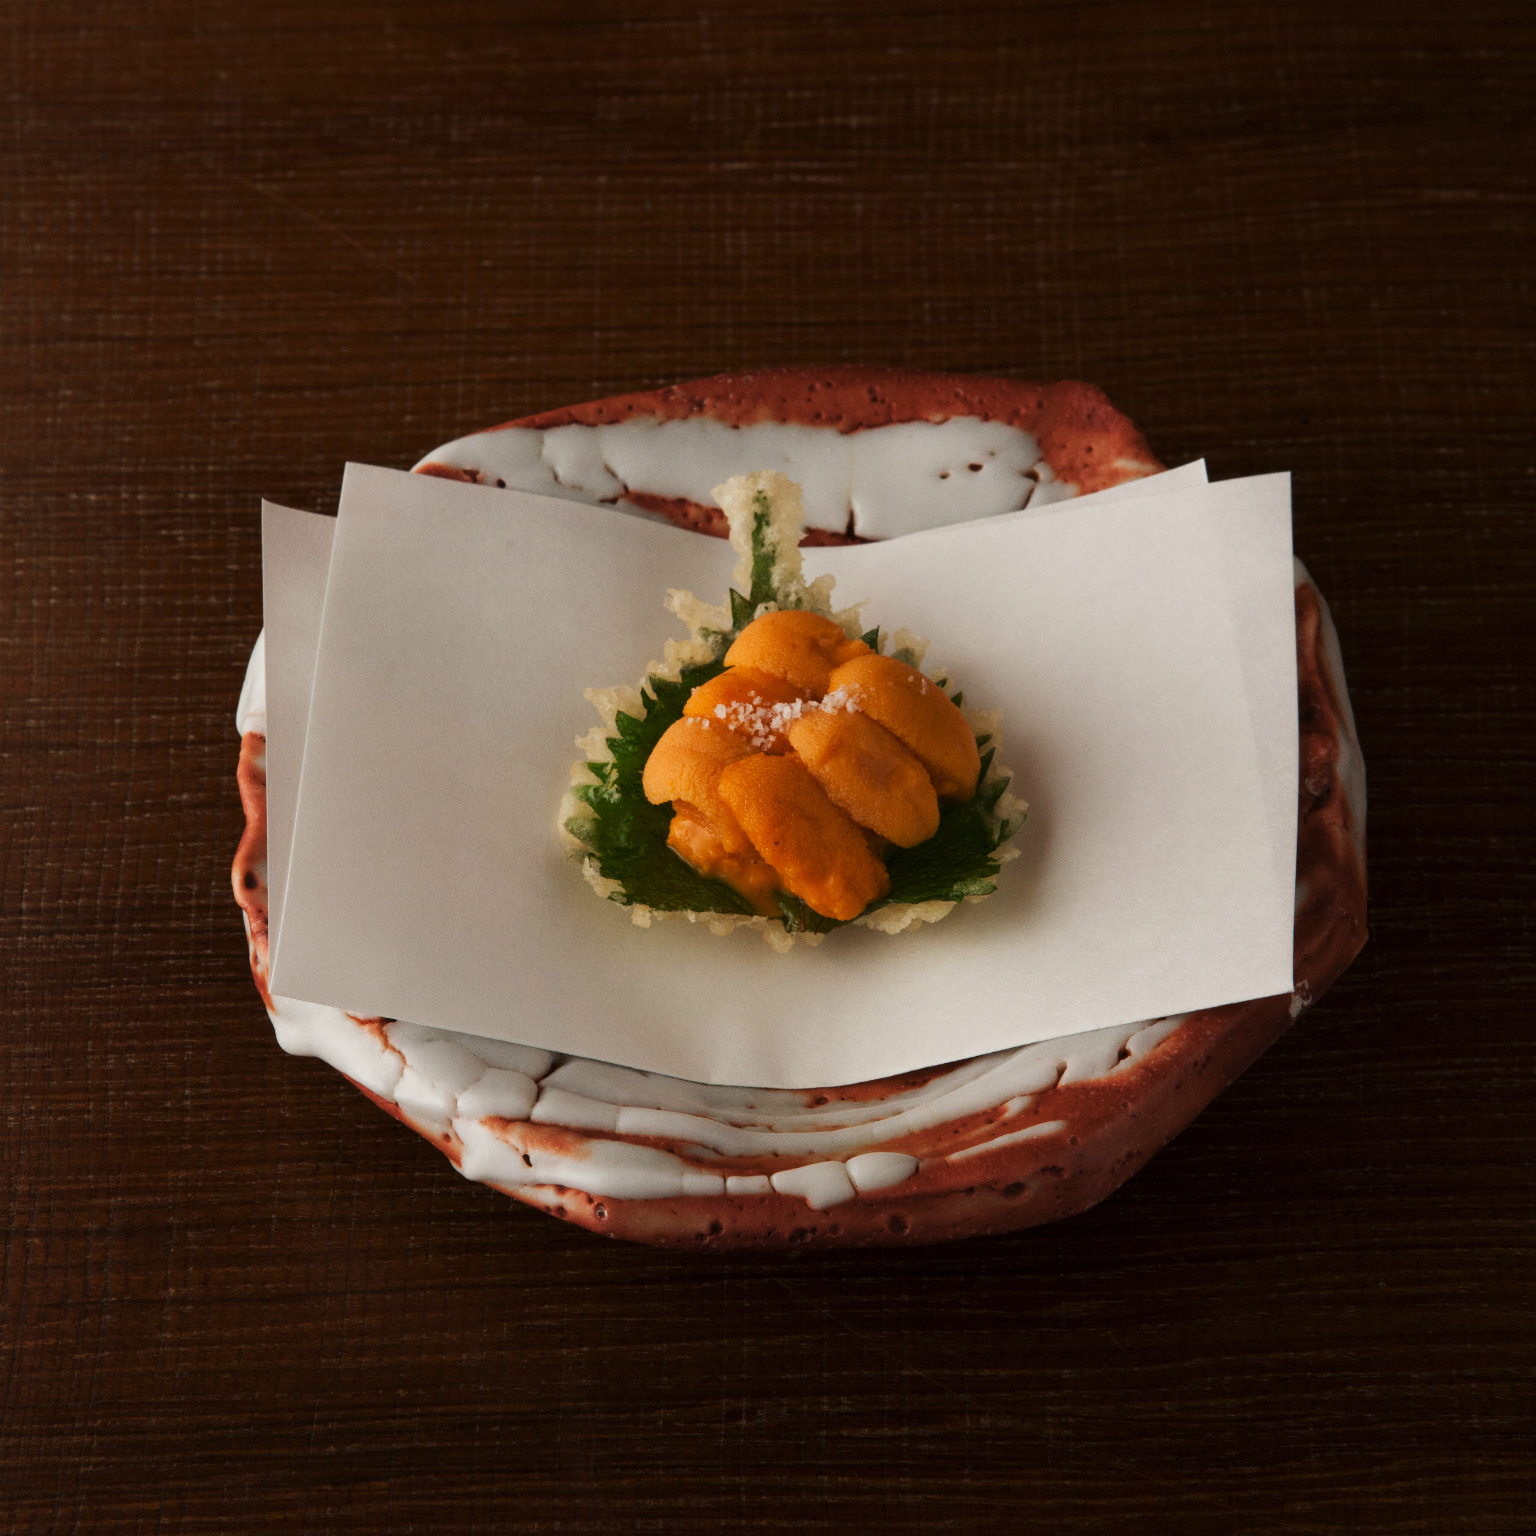 A young chef with a recipe intended to restore people’s taste for tempura